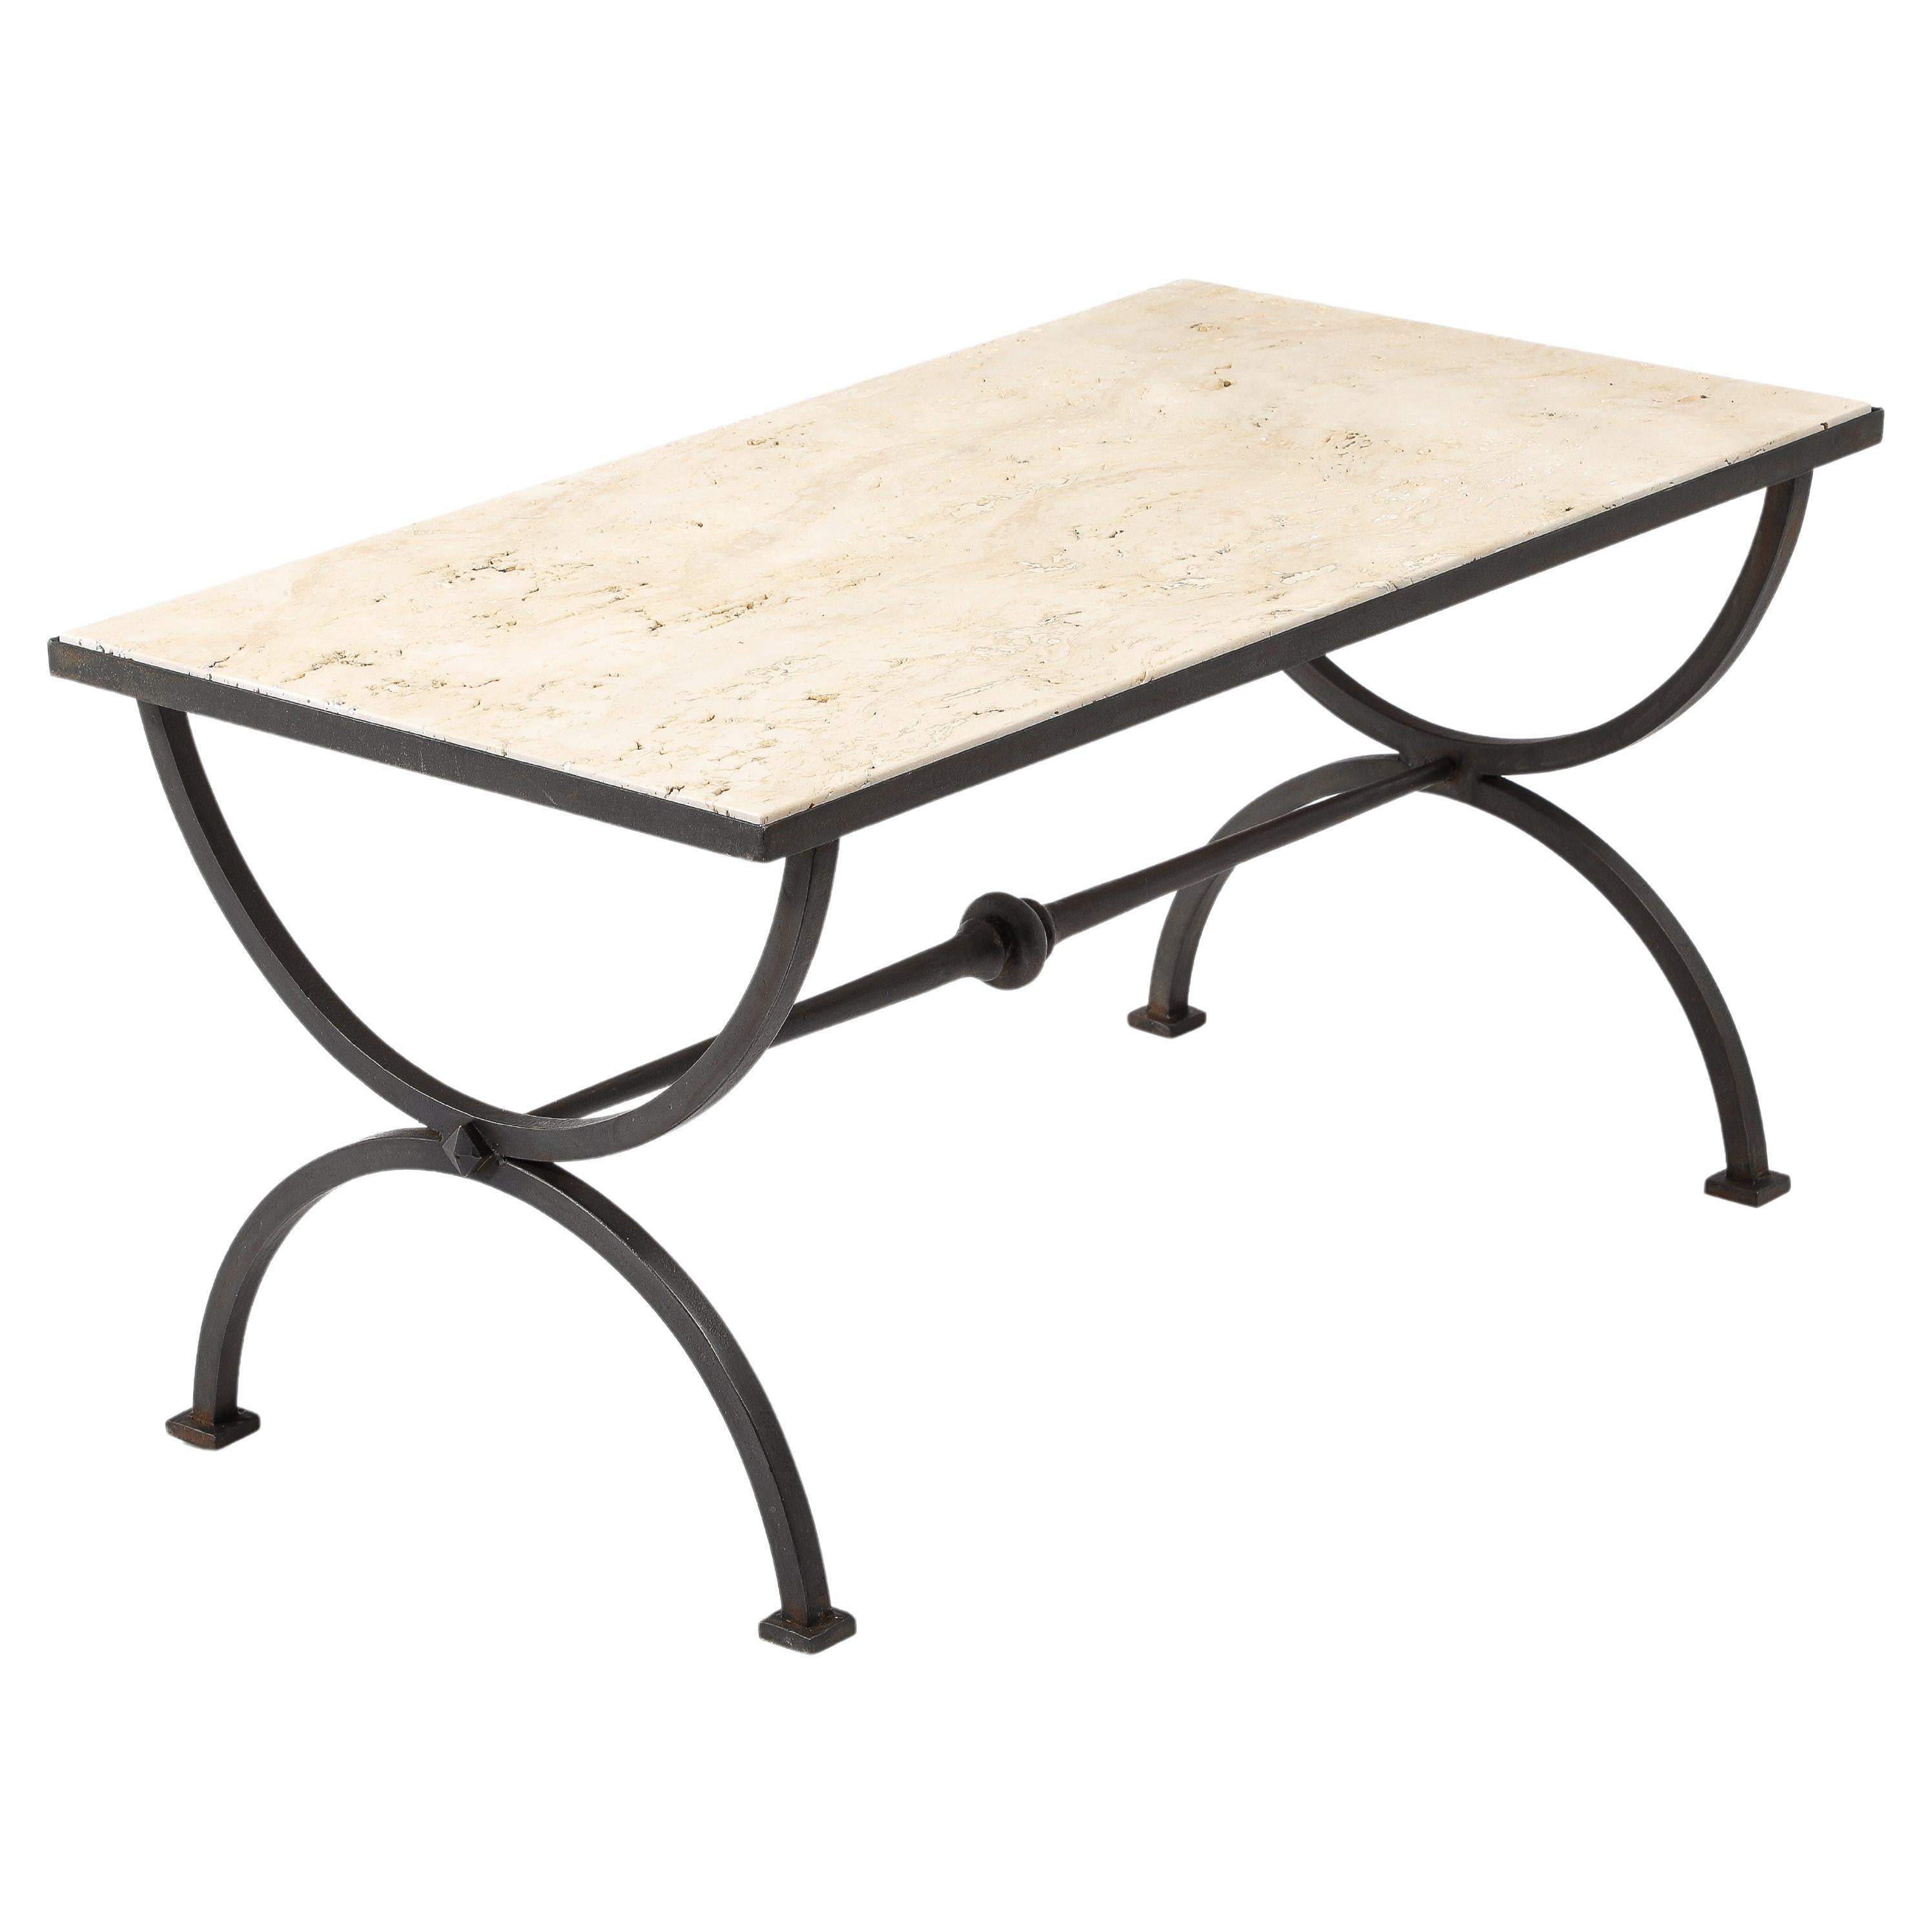 Travertin Marble & Wrought Iron Coffee Table, France 1940's For Sale